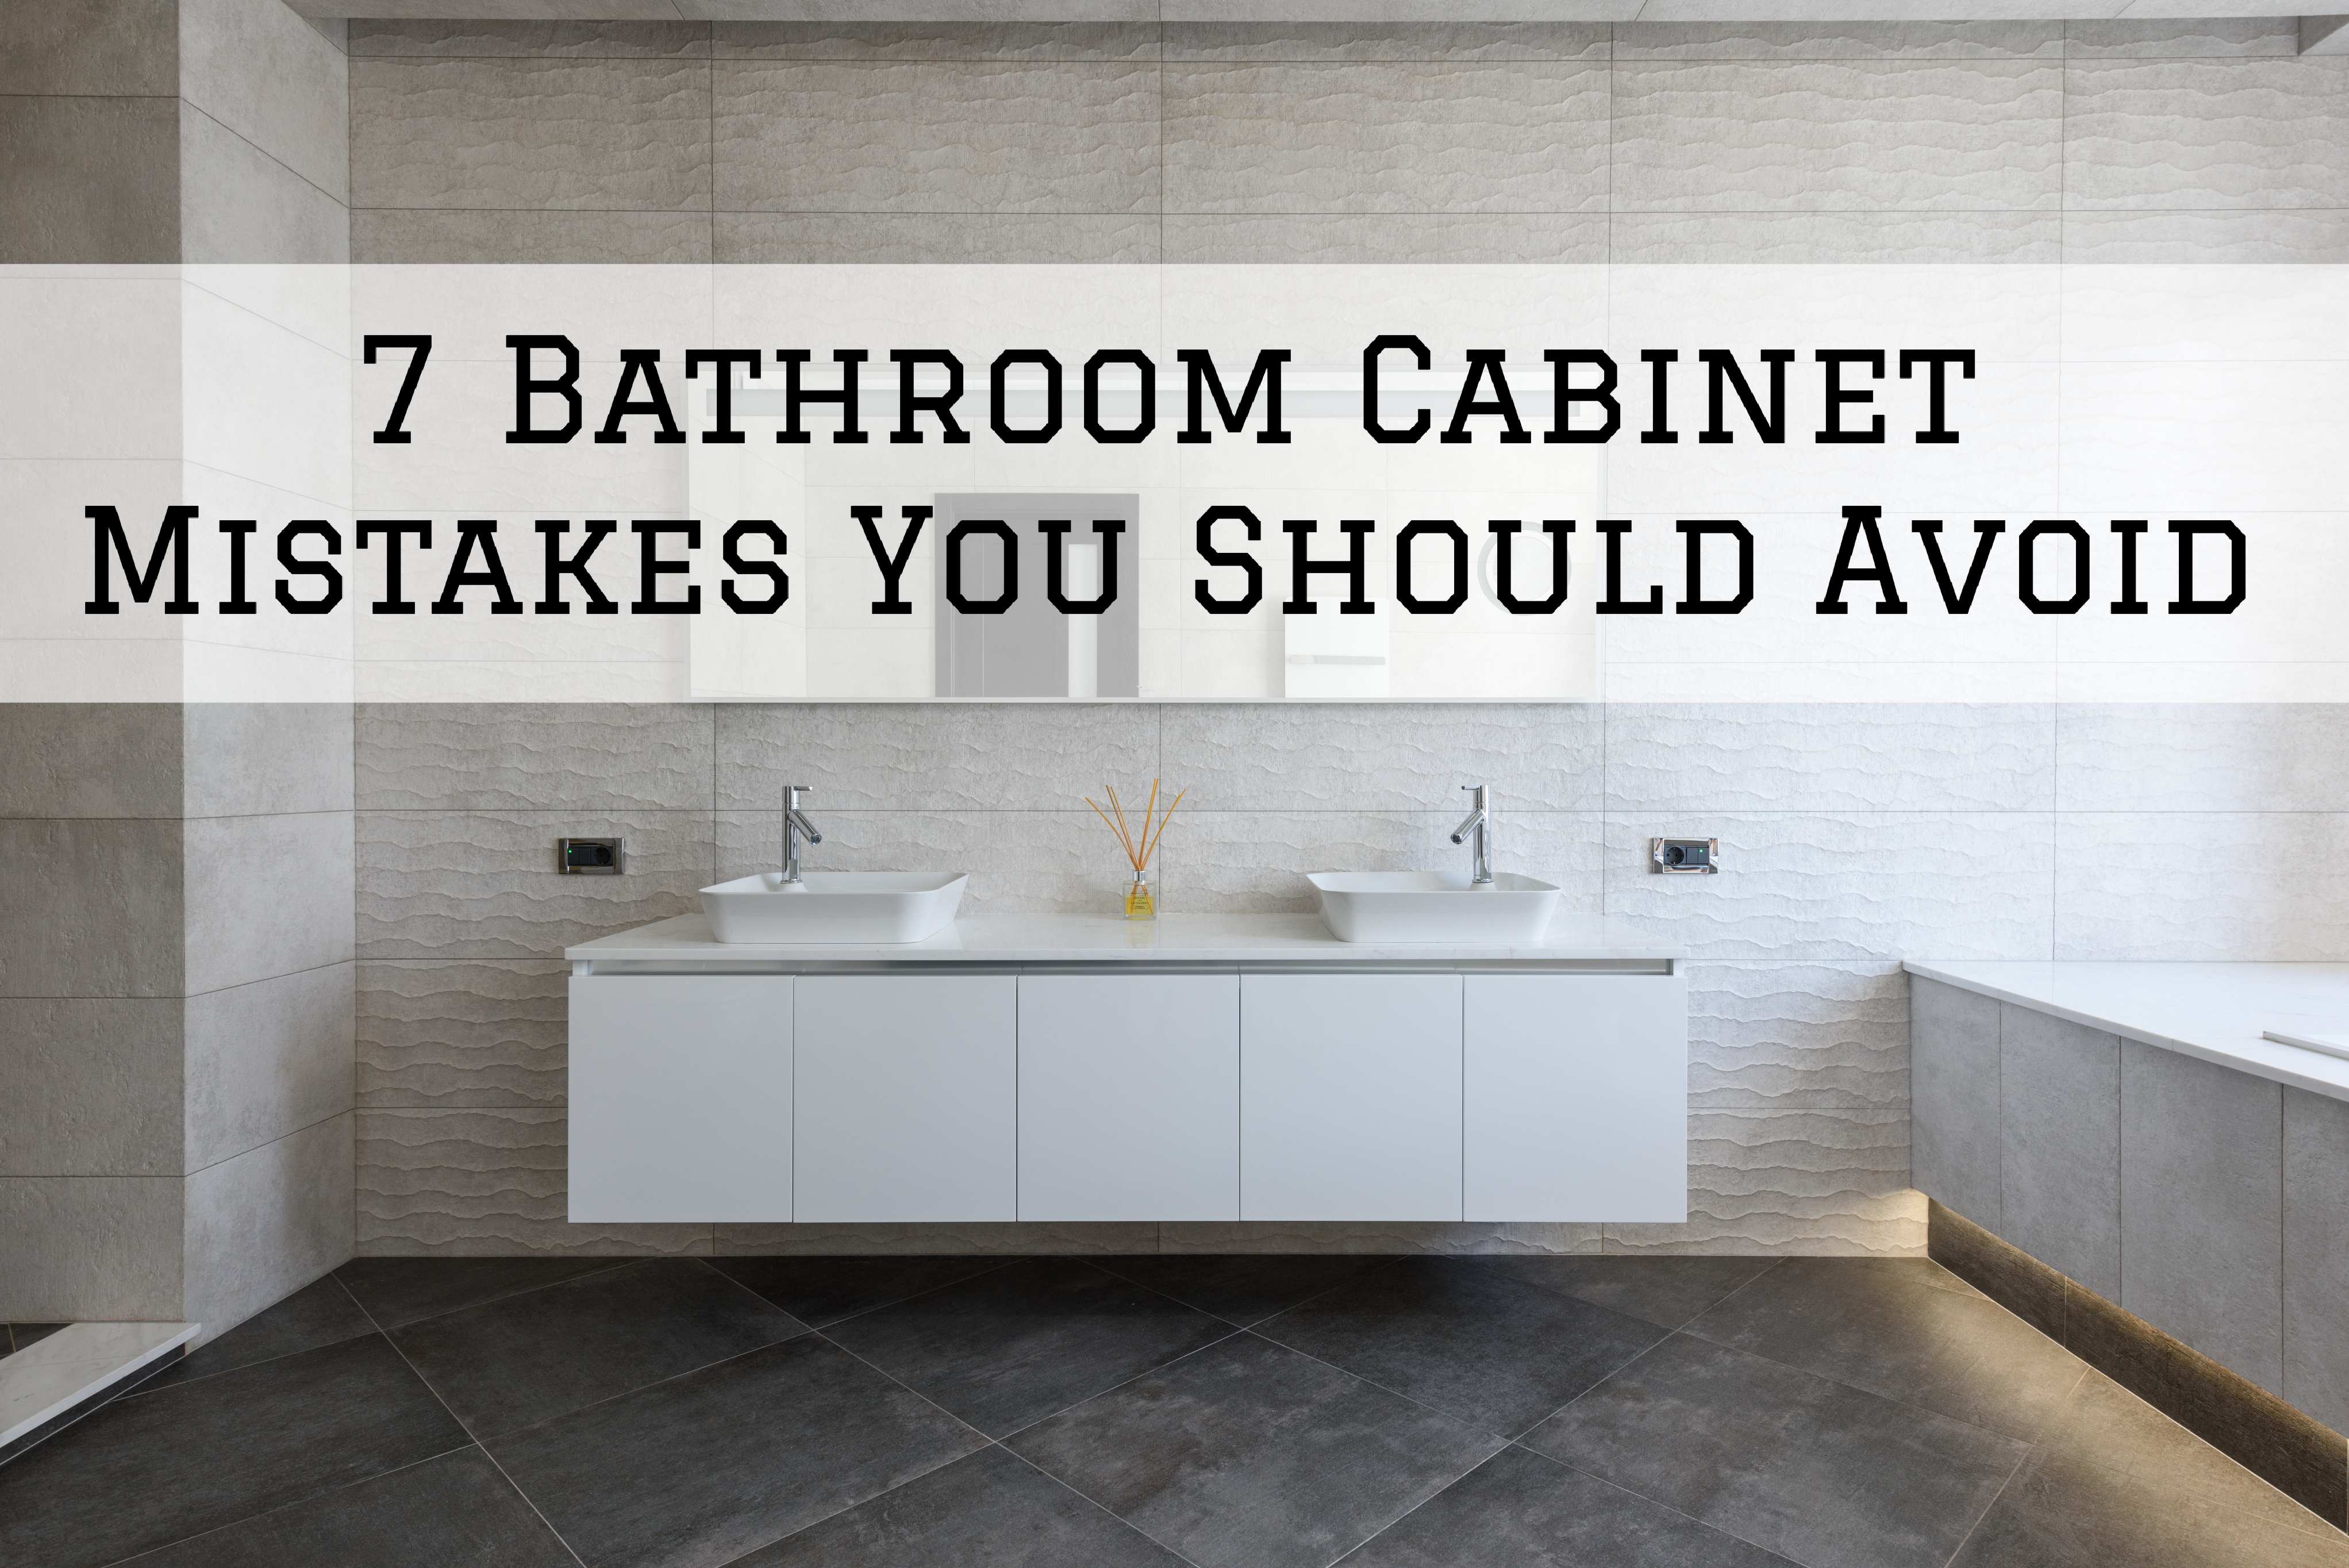 7 Bathroom Cabinet Mistakes You Should Avoid in Ottawa, Ontario